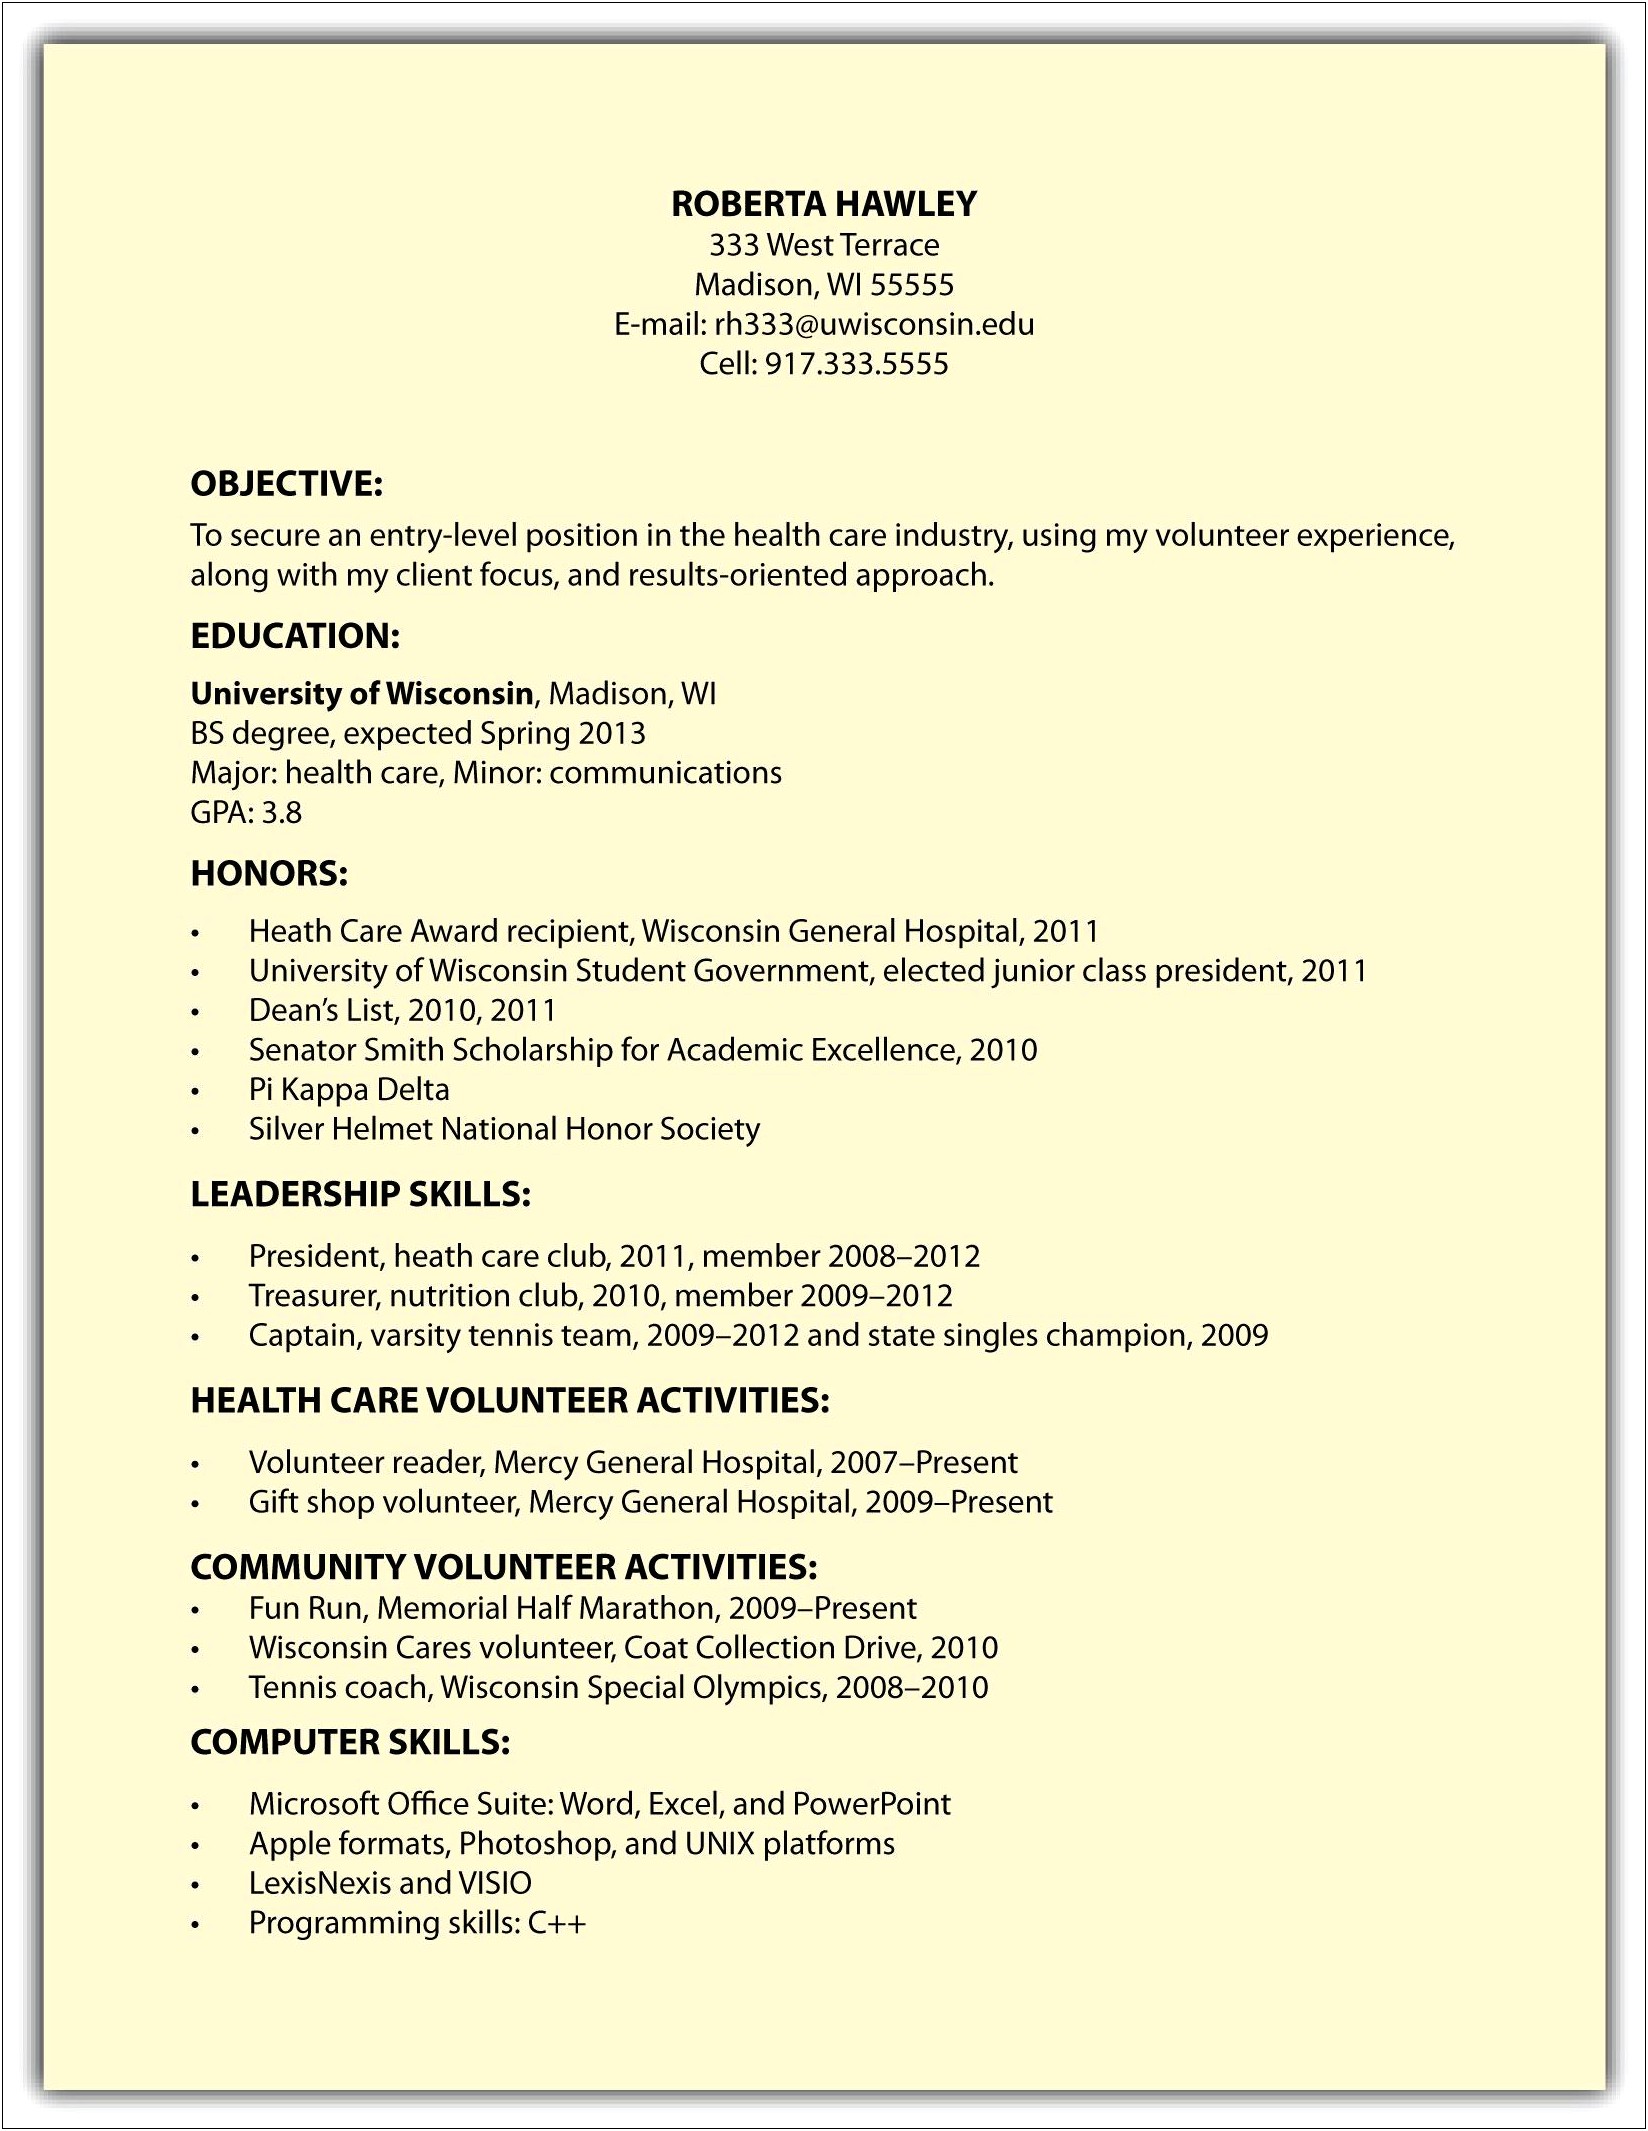 Functional Resume With Online Work Experience Entries